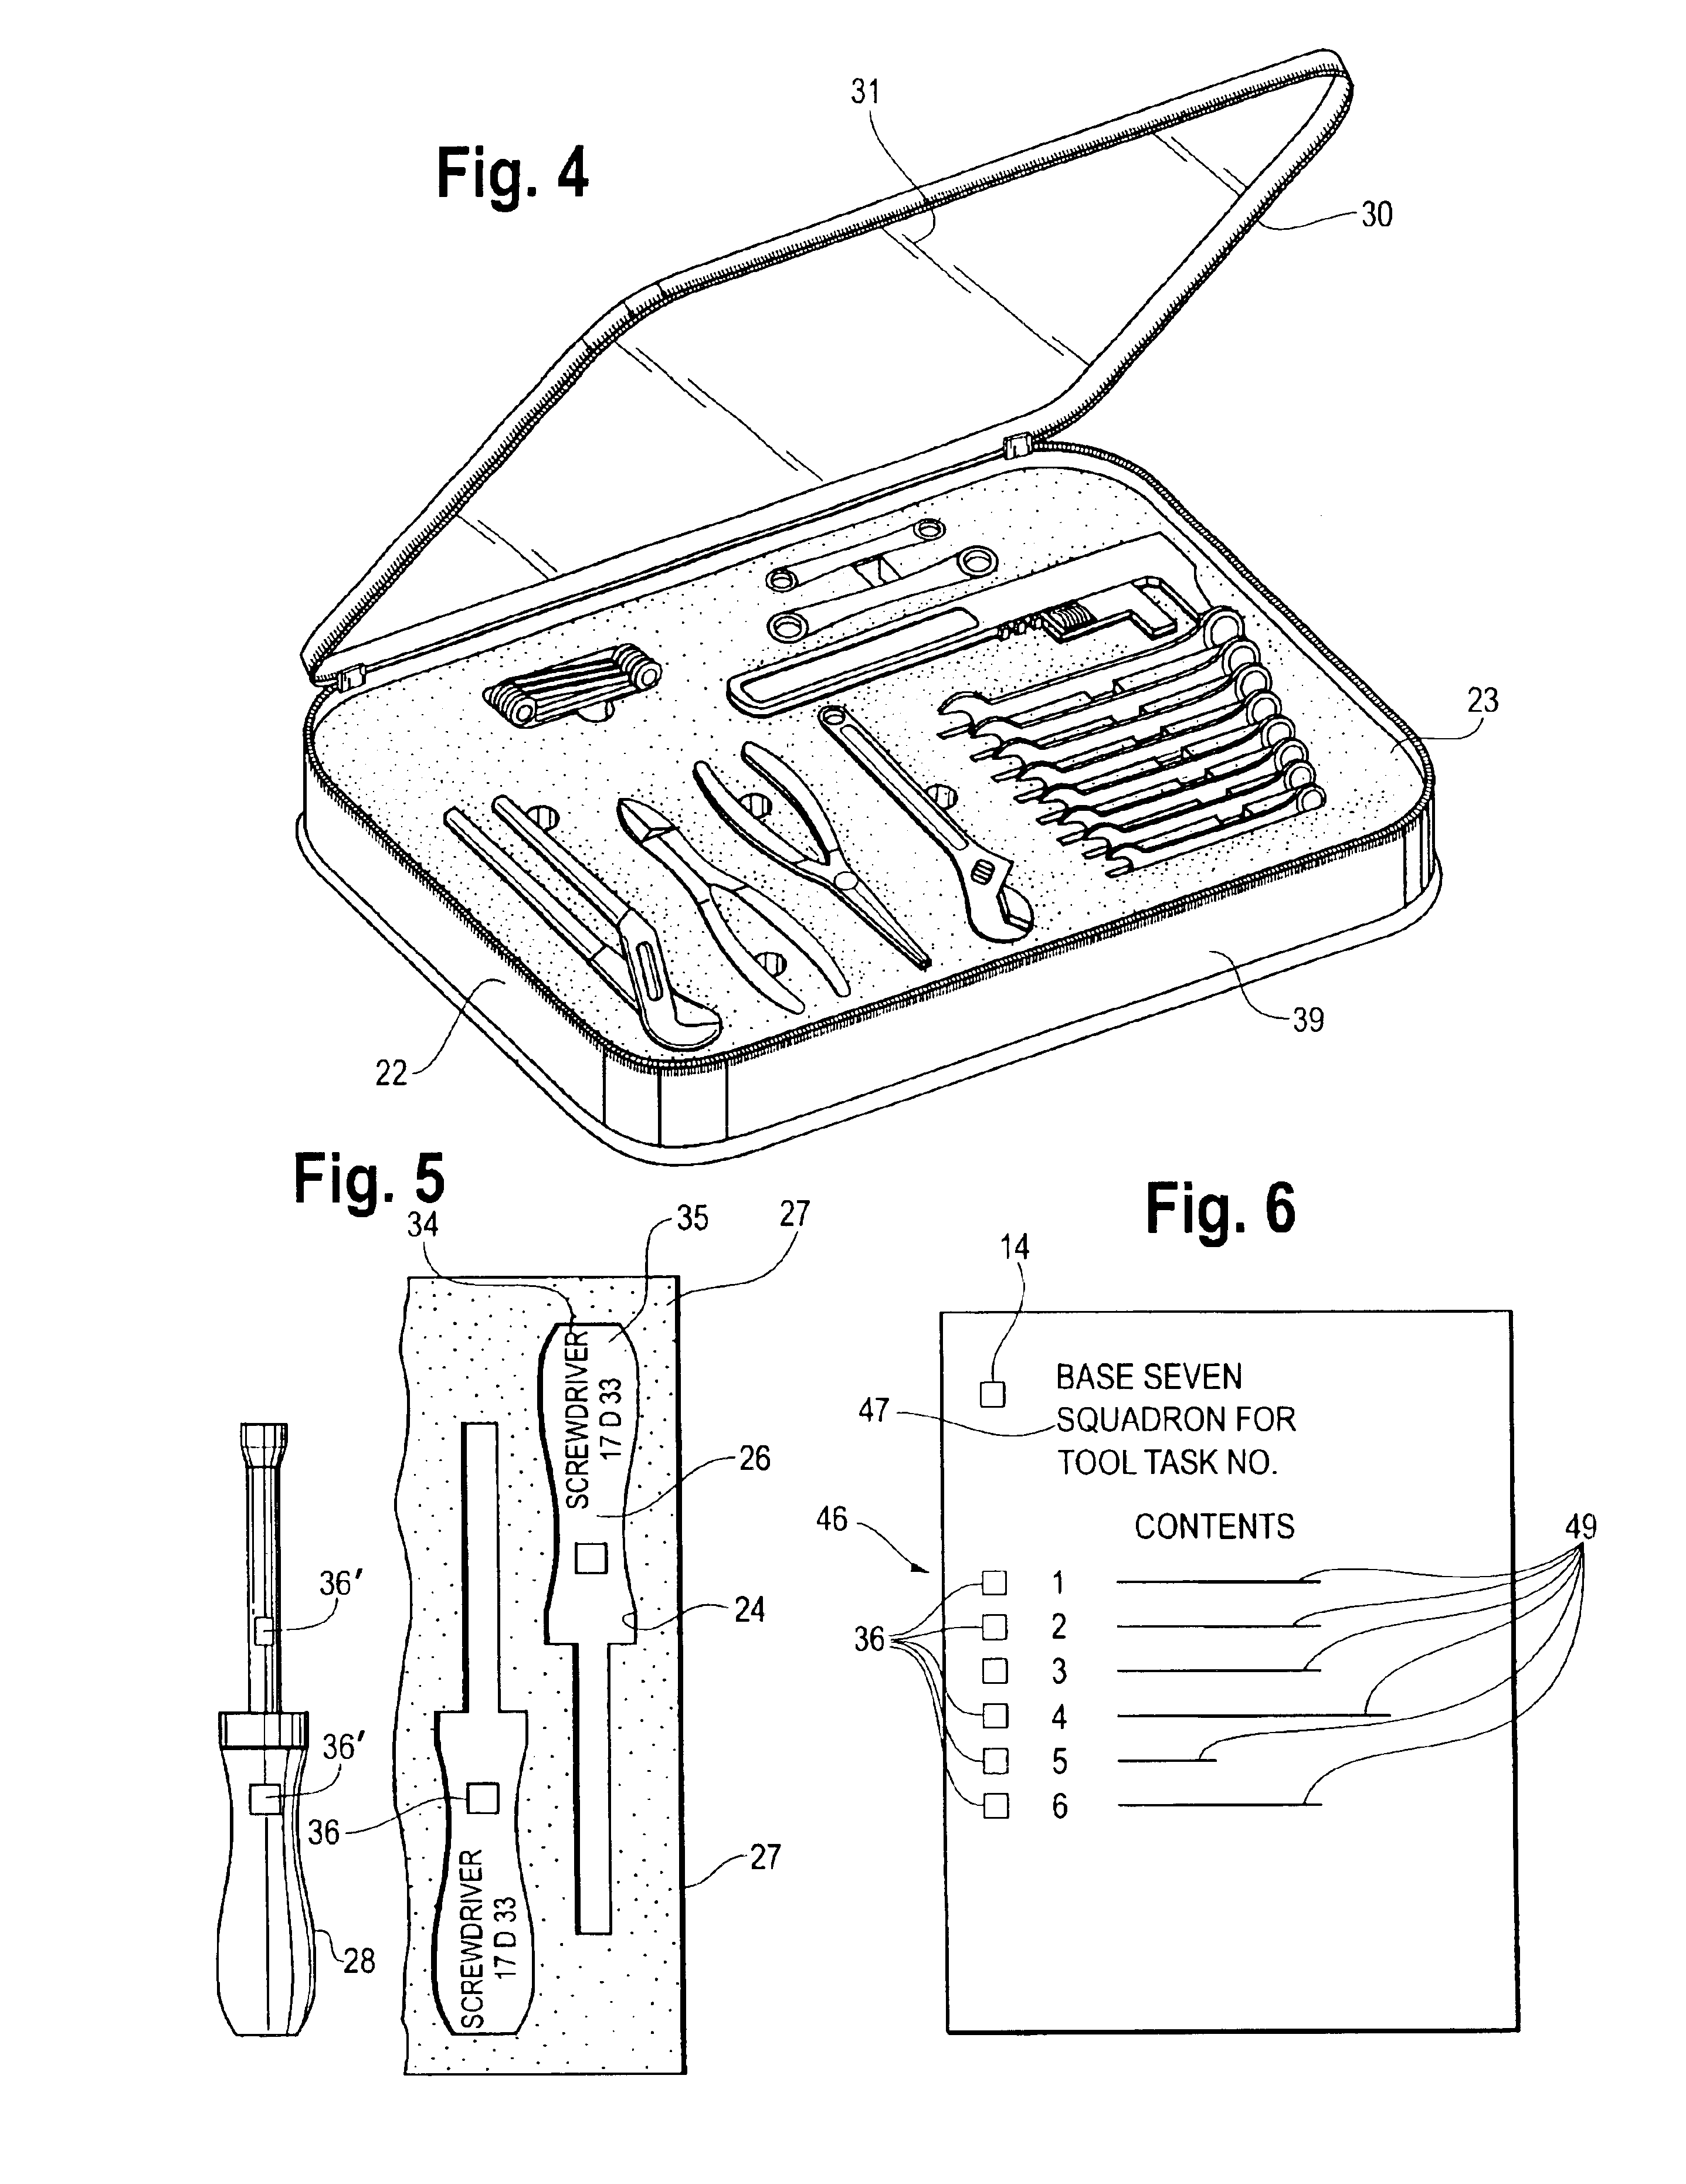 Method of tracking tools